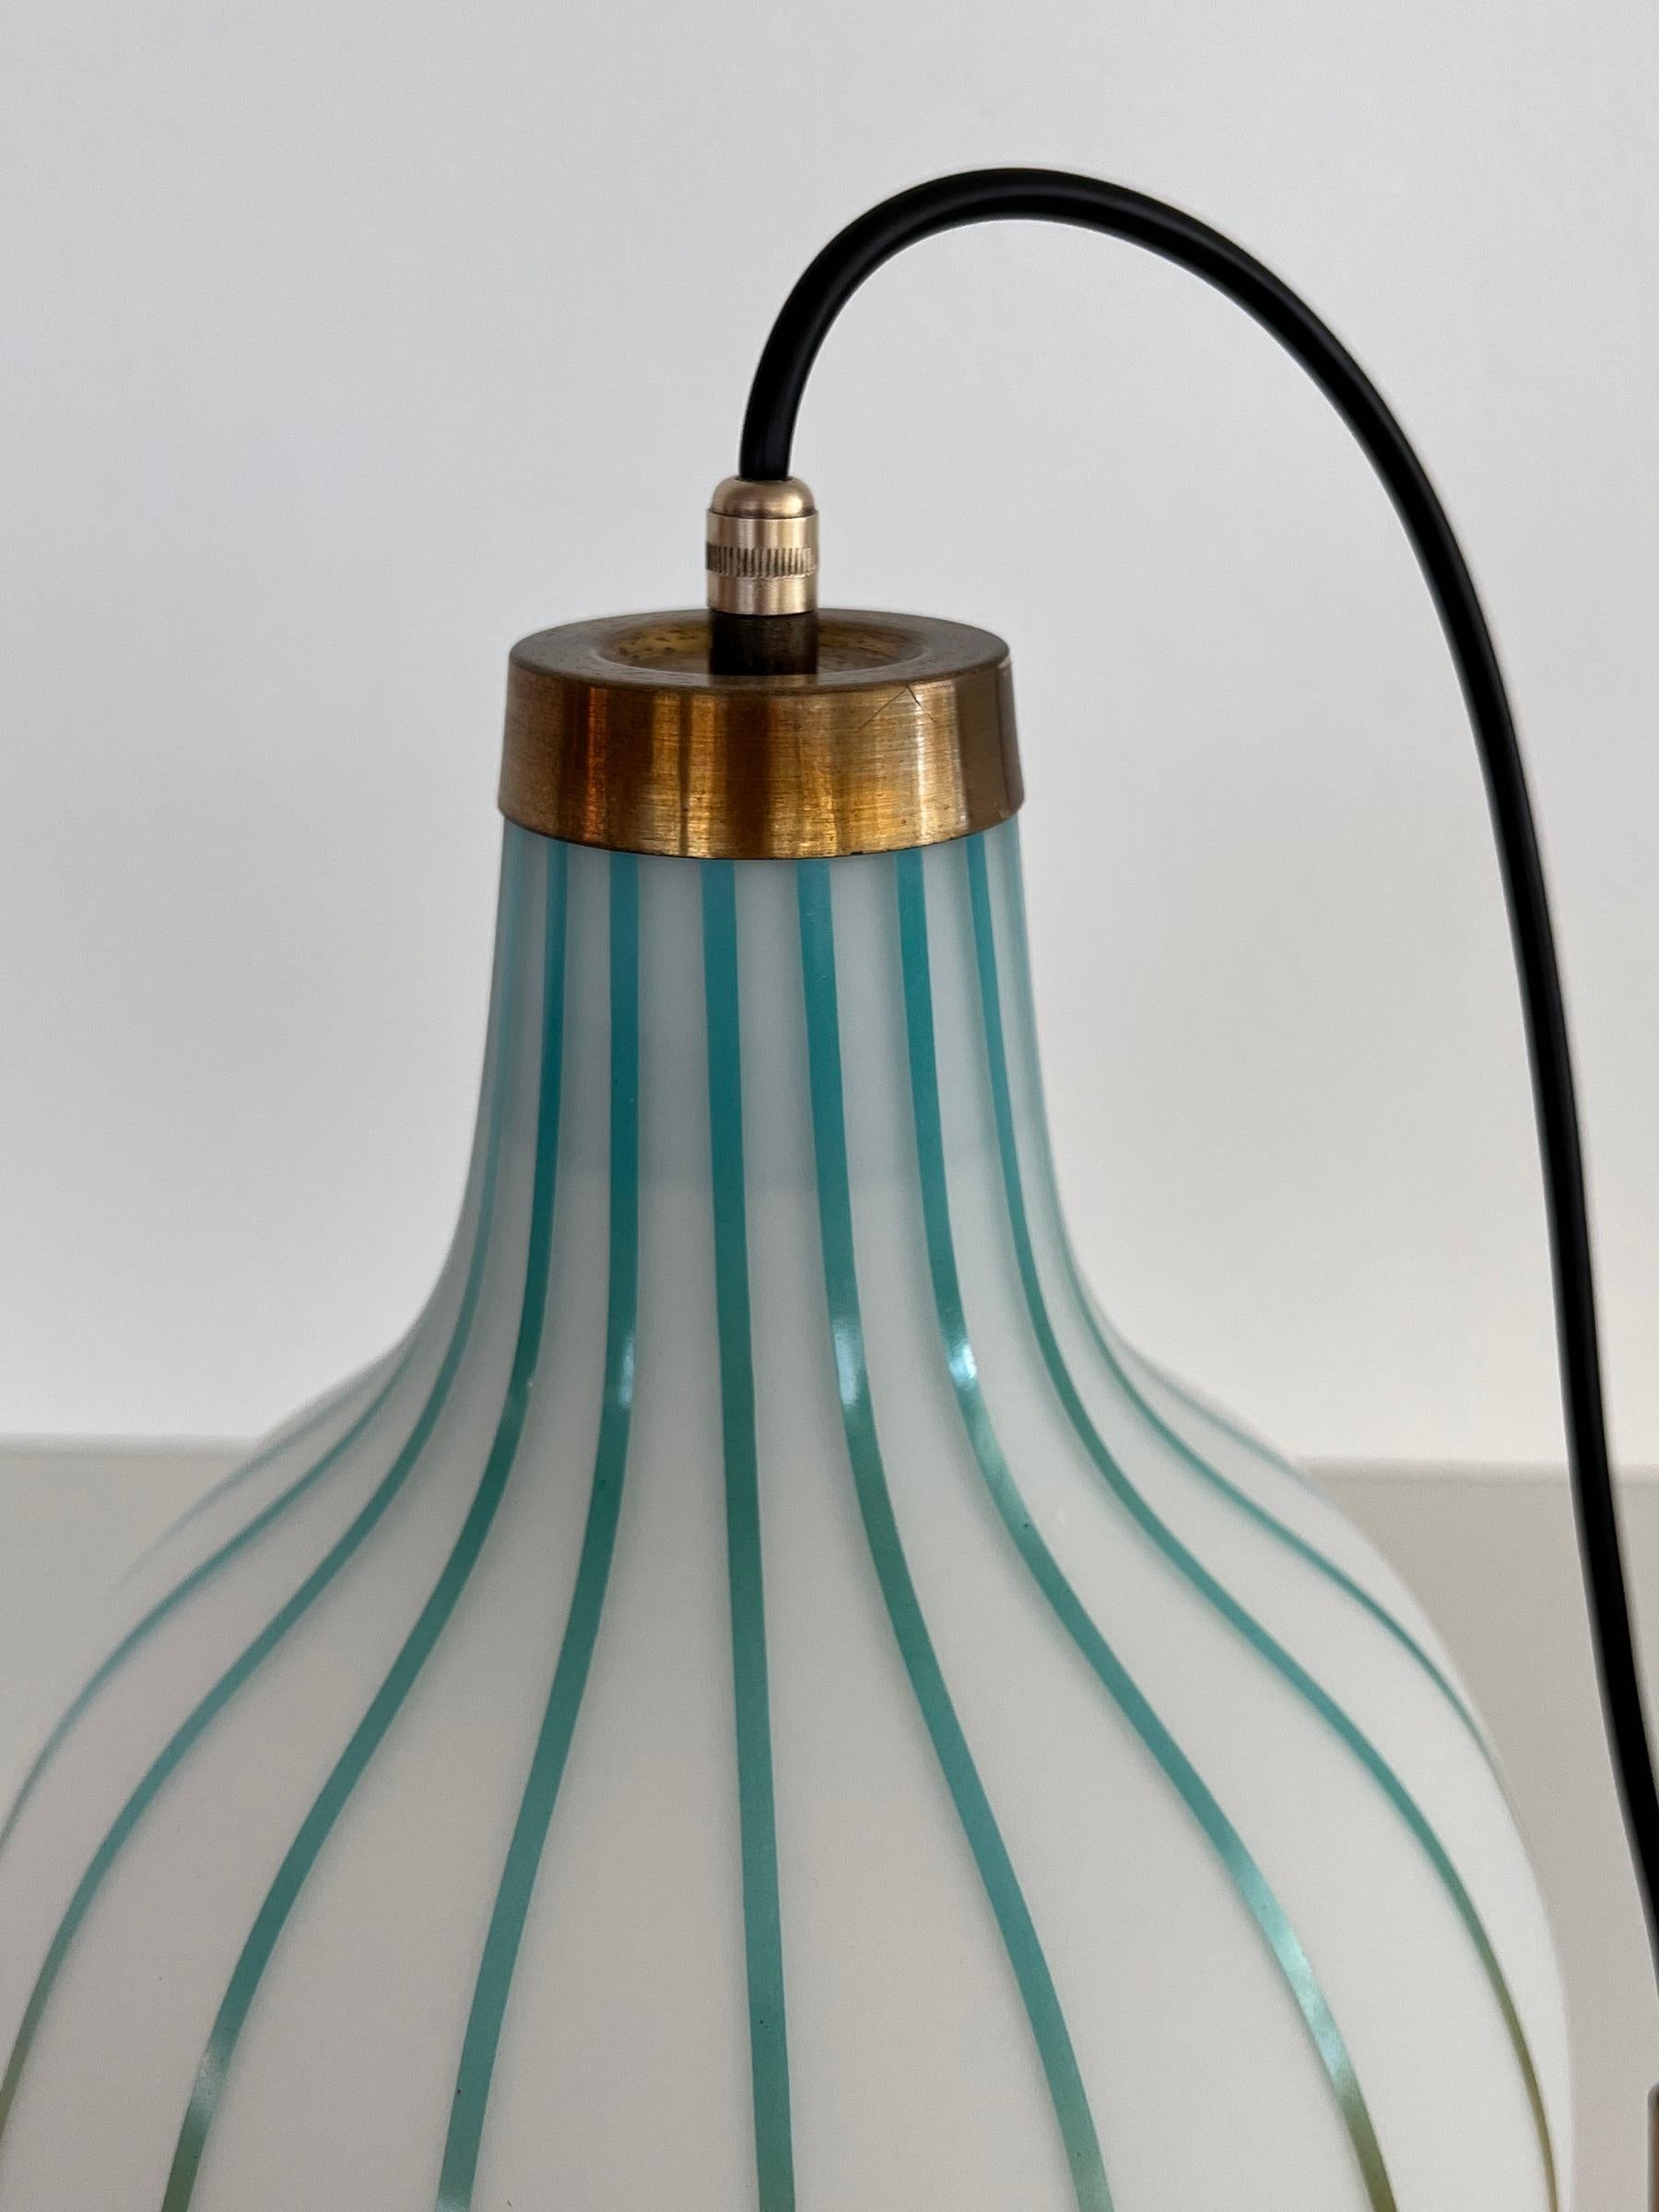 Italian MidCentury Pendant Light with Murano Glass in Massimo Vignelli Style 60s For Sale 4